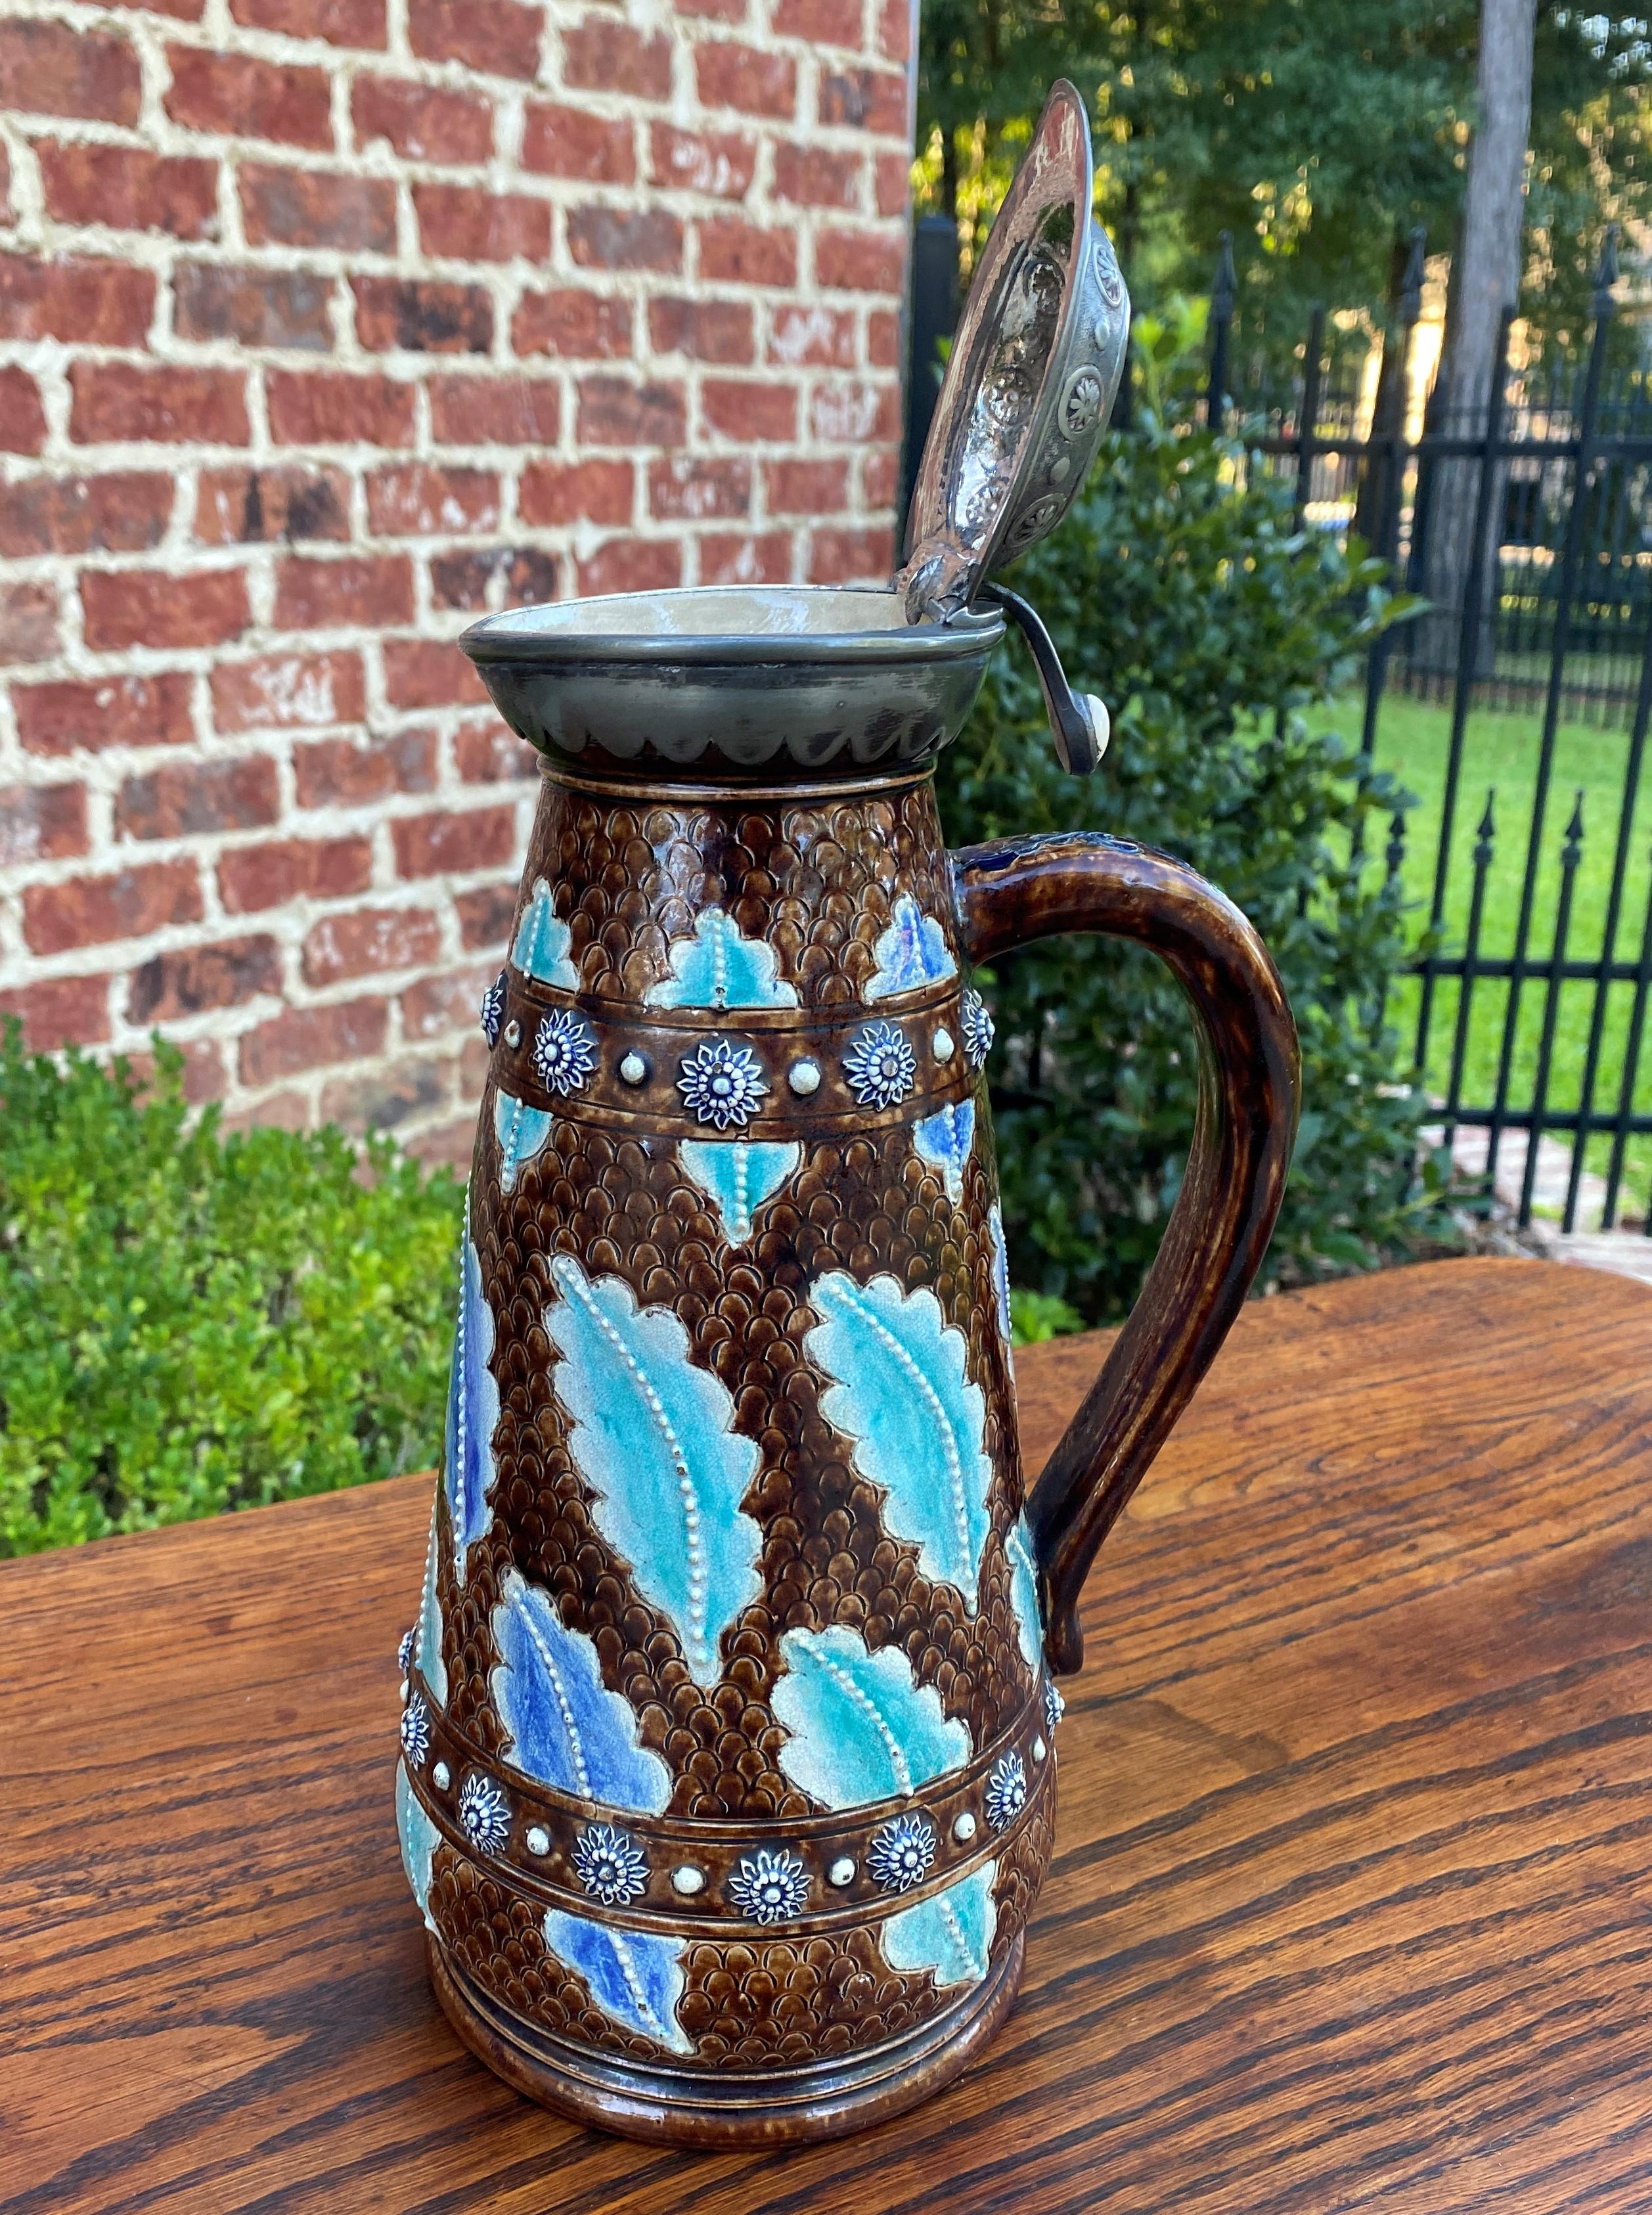 Antique French Majolica Stein Jug Pitcher Silver or Pewter Hinged Lid, c. 1900 In Good Condition For Sale In Tyler, TX